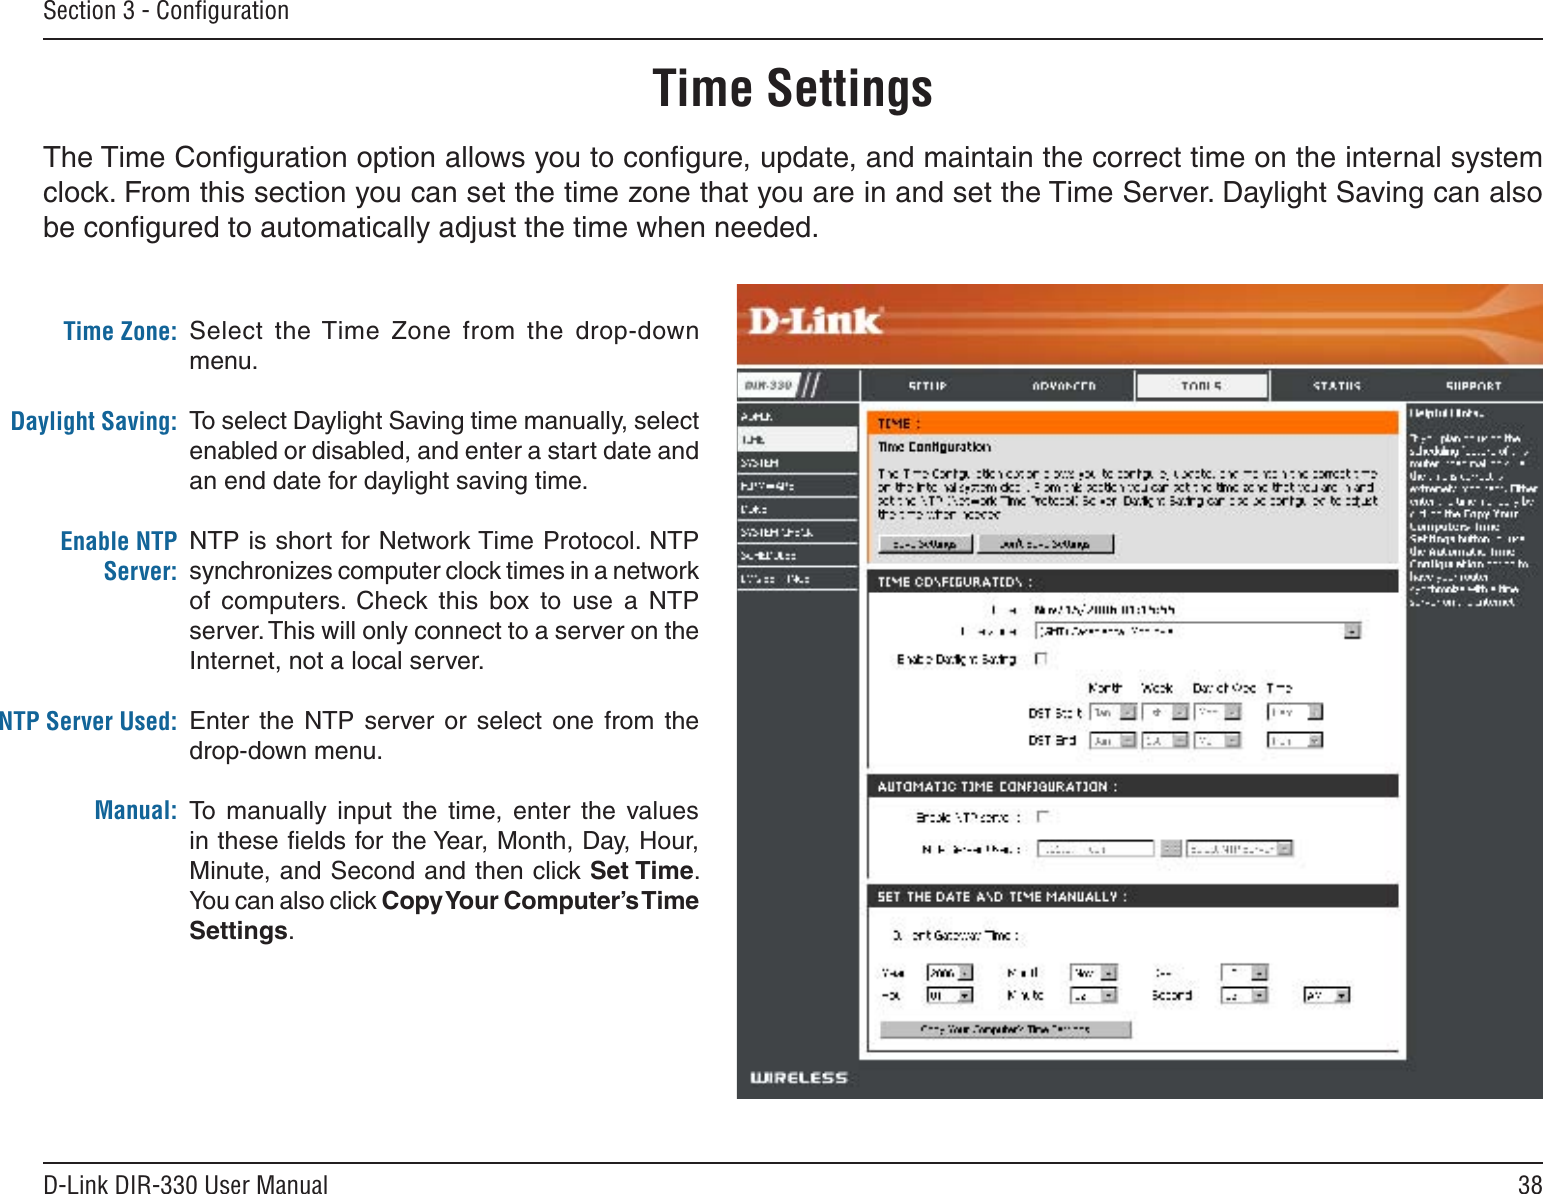 38D-Link DIR-330 User ManualSection 3 - ConﬁgurationTime SettingsSelect  the Time  Zone  from  the  drop-down menu.To select Daylight Saving time manually, select enabled or disabled, and enter a start date and an end date for daylight saving time.NTP is short for Network Time Protocol. NTP synchronizes computer clock times in a network of  computers.  Check  this  box  to  use  a  NTP server. This will only connect to a server on the Internet, not a local server.Enter  the  NTP  server  or  select  one from  the drop-down menu.To  manually  input  the  time,  enter  the  values in these ﬁelds for the Year, Month, Day, Hour, Minute, and Second and then click Set Time. You can also click Copy Your Computer’s Time Settings.Time Zone:Daylight Saving:Enable NTP Server:NTP Server Used:Manual:The Time Conﬁguration option allows you to conﬁgure, update, and maintain the correct time on the internal system clock. From this section you can set the time zone that you are in and set the Time Server. Daylight Saving can also be conﬁgured to automatically adjust the time when needed.